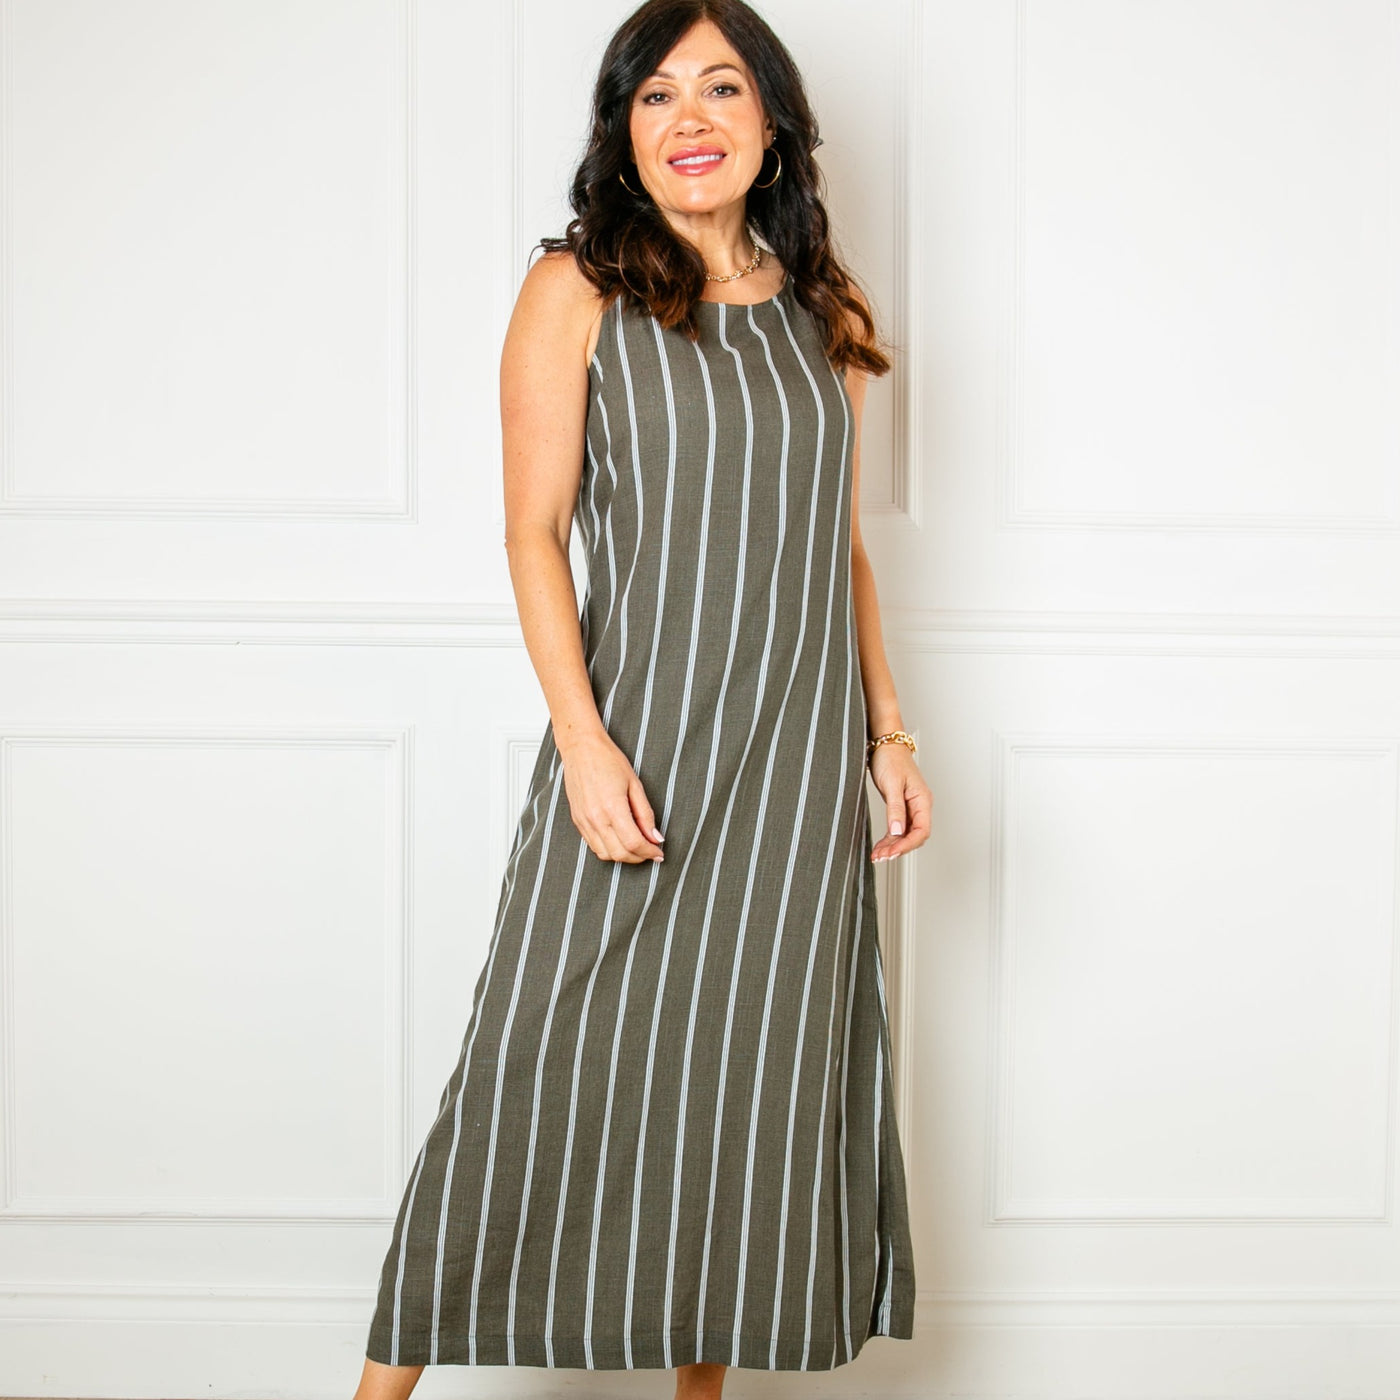 The khaki green Linen Tie Back Maxi Dress, sleeveless with an a-line silhouette and a round neckline